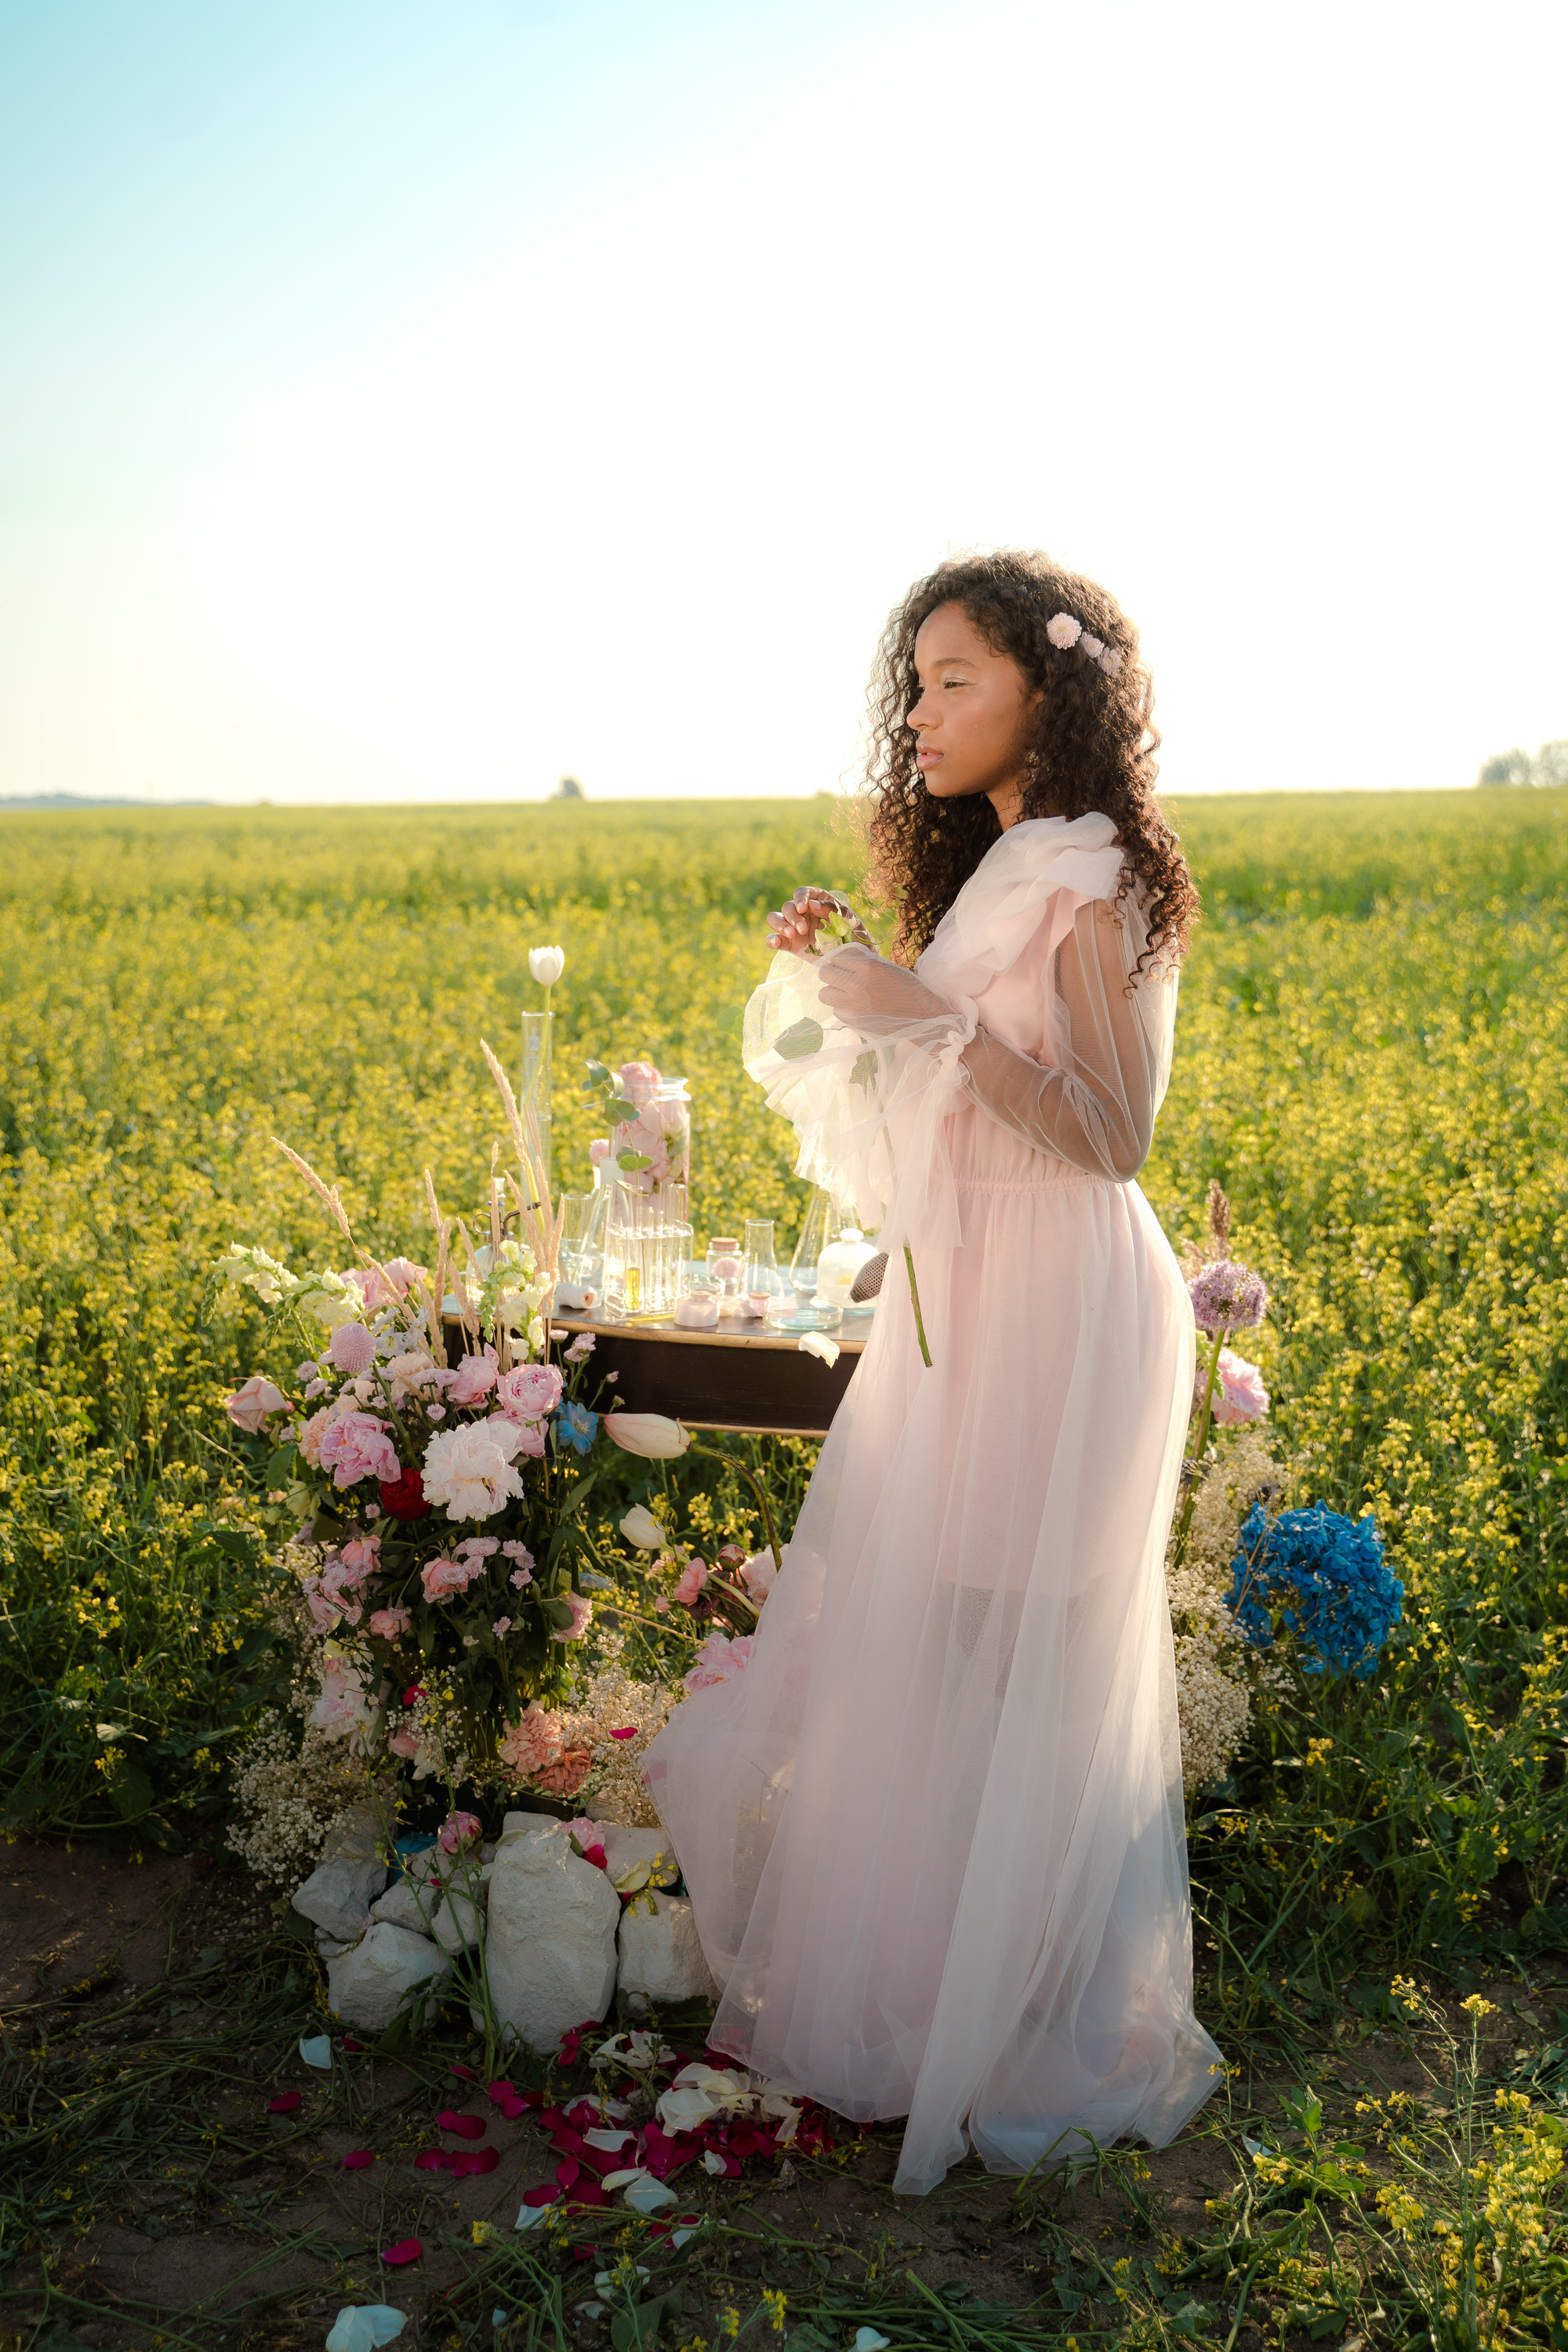 Woman in Tulle Dress Standing in Flower Field Next to Glass Laboratory Equipment